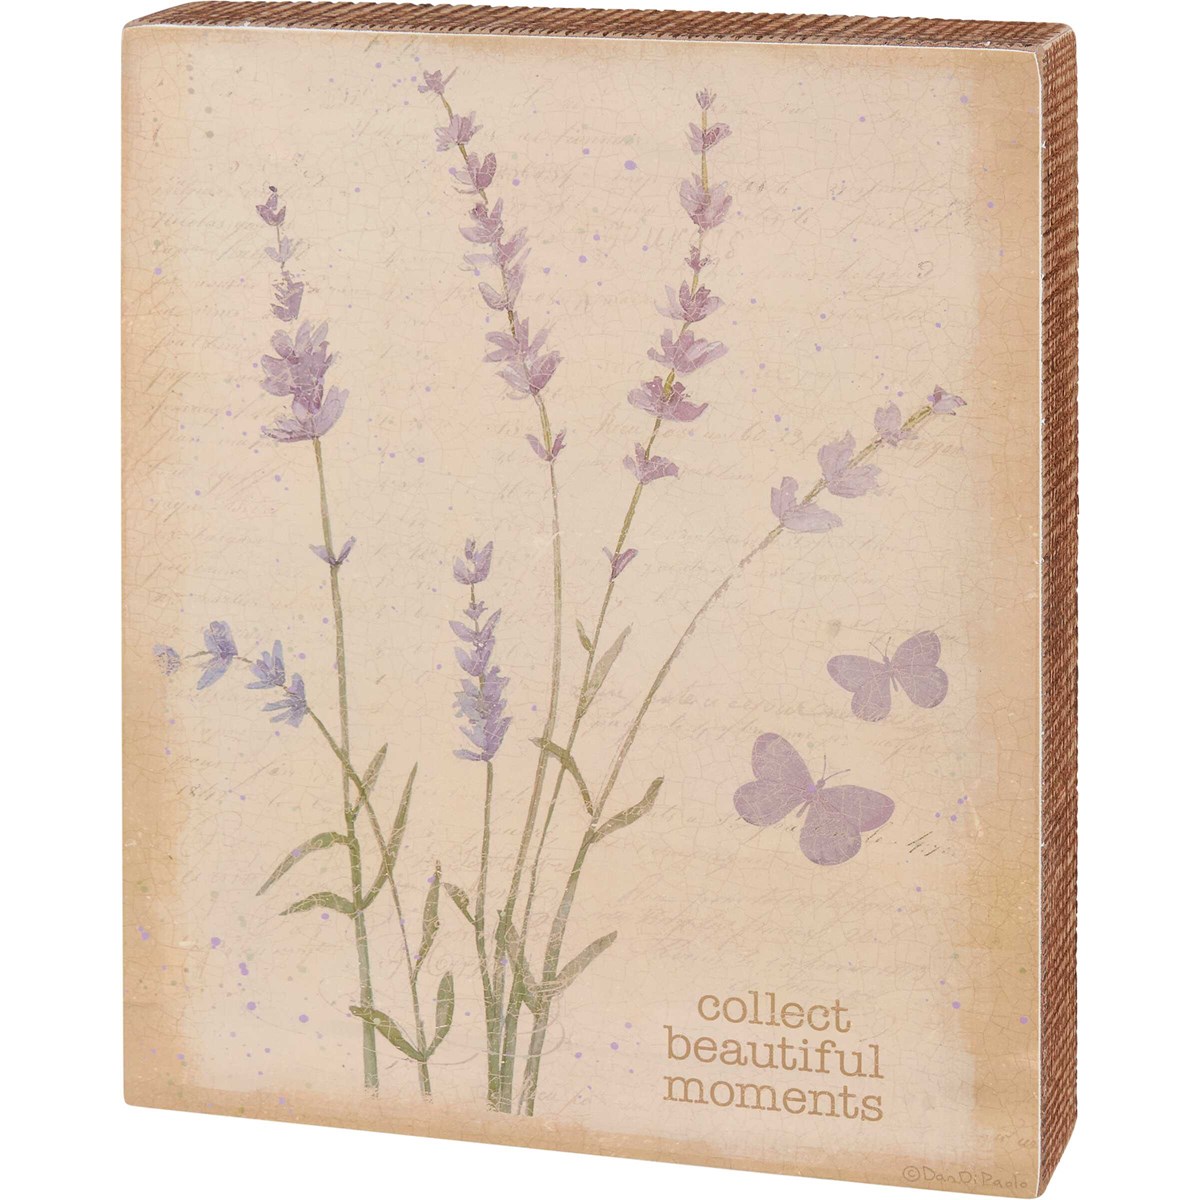 Collect Beautiful Moments Box Sign - Wood, Paper